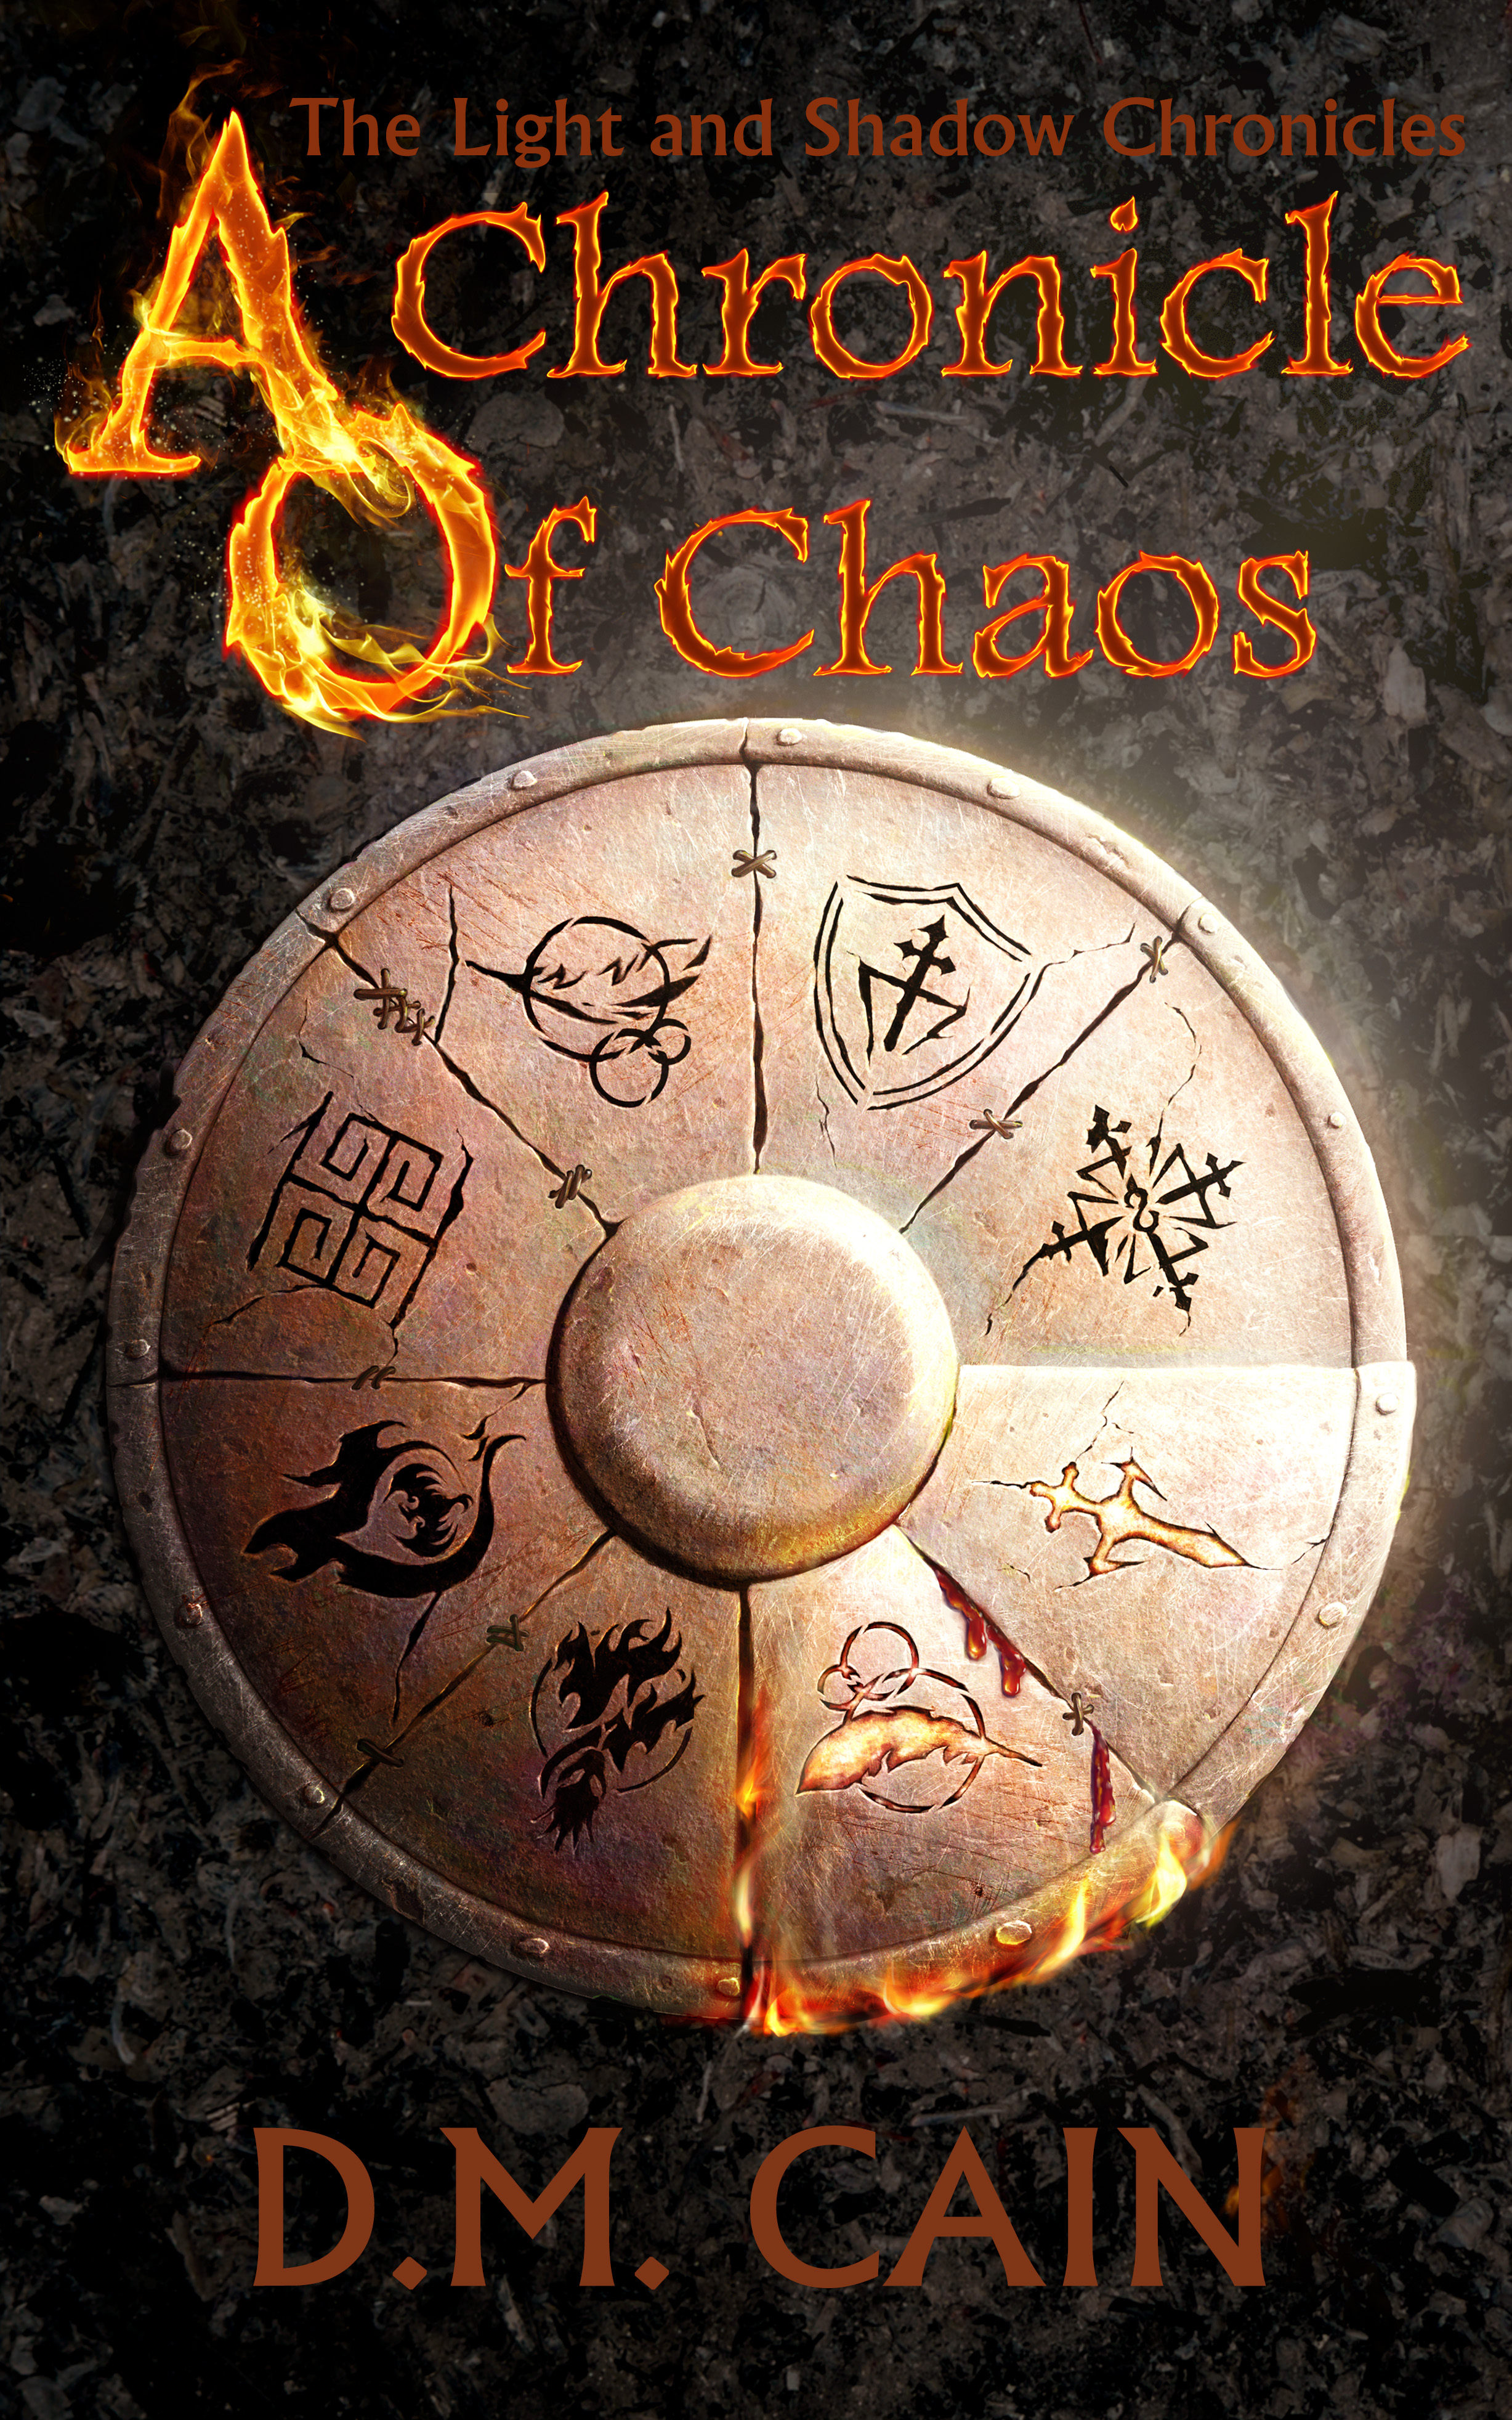 epic fantasy cover for A Chonicle of Chaos by DM Cain